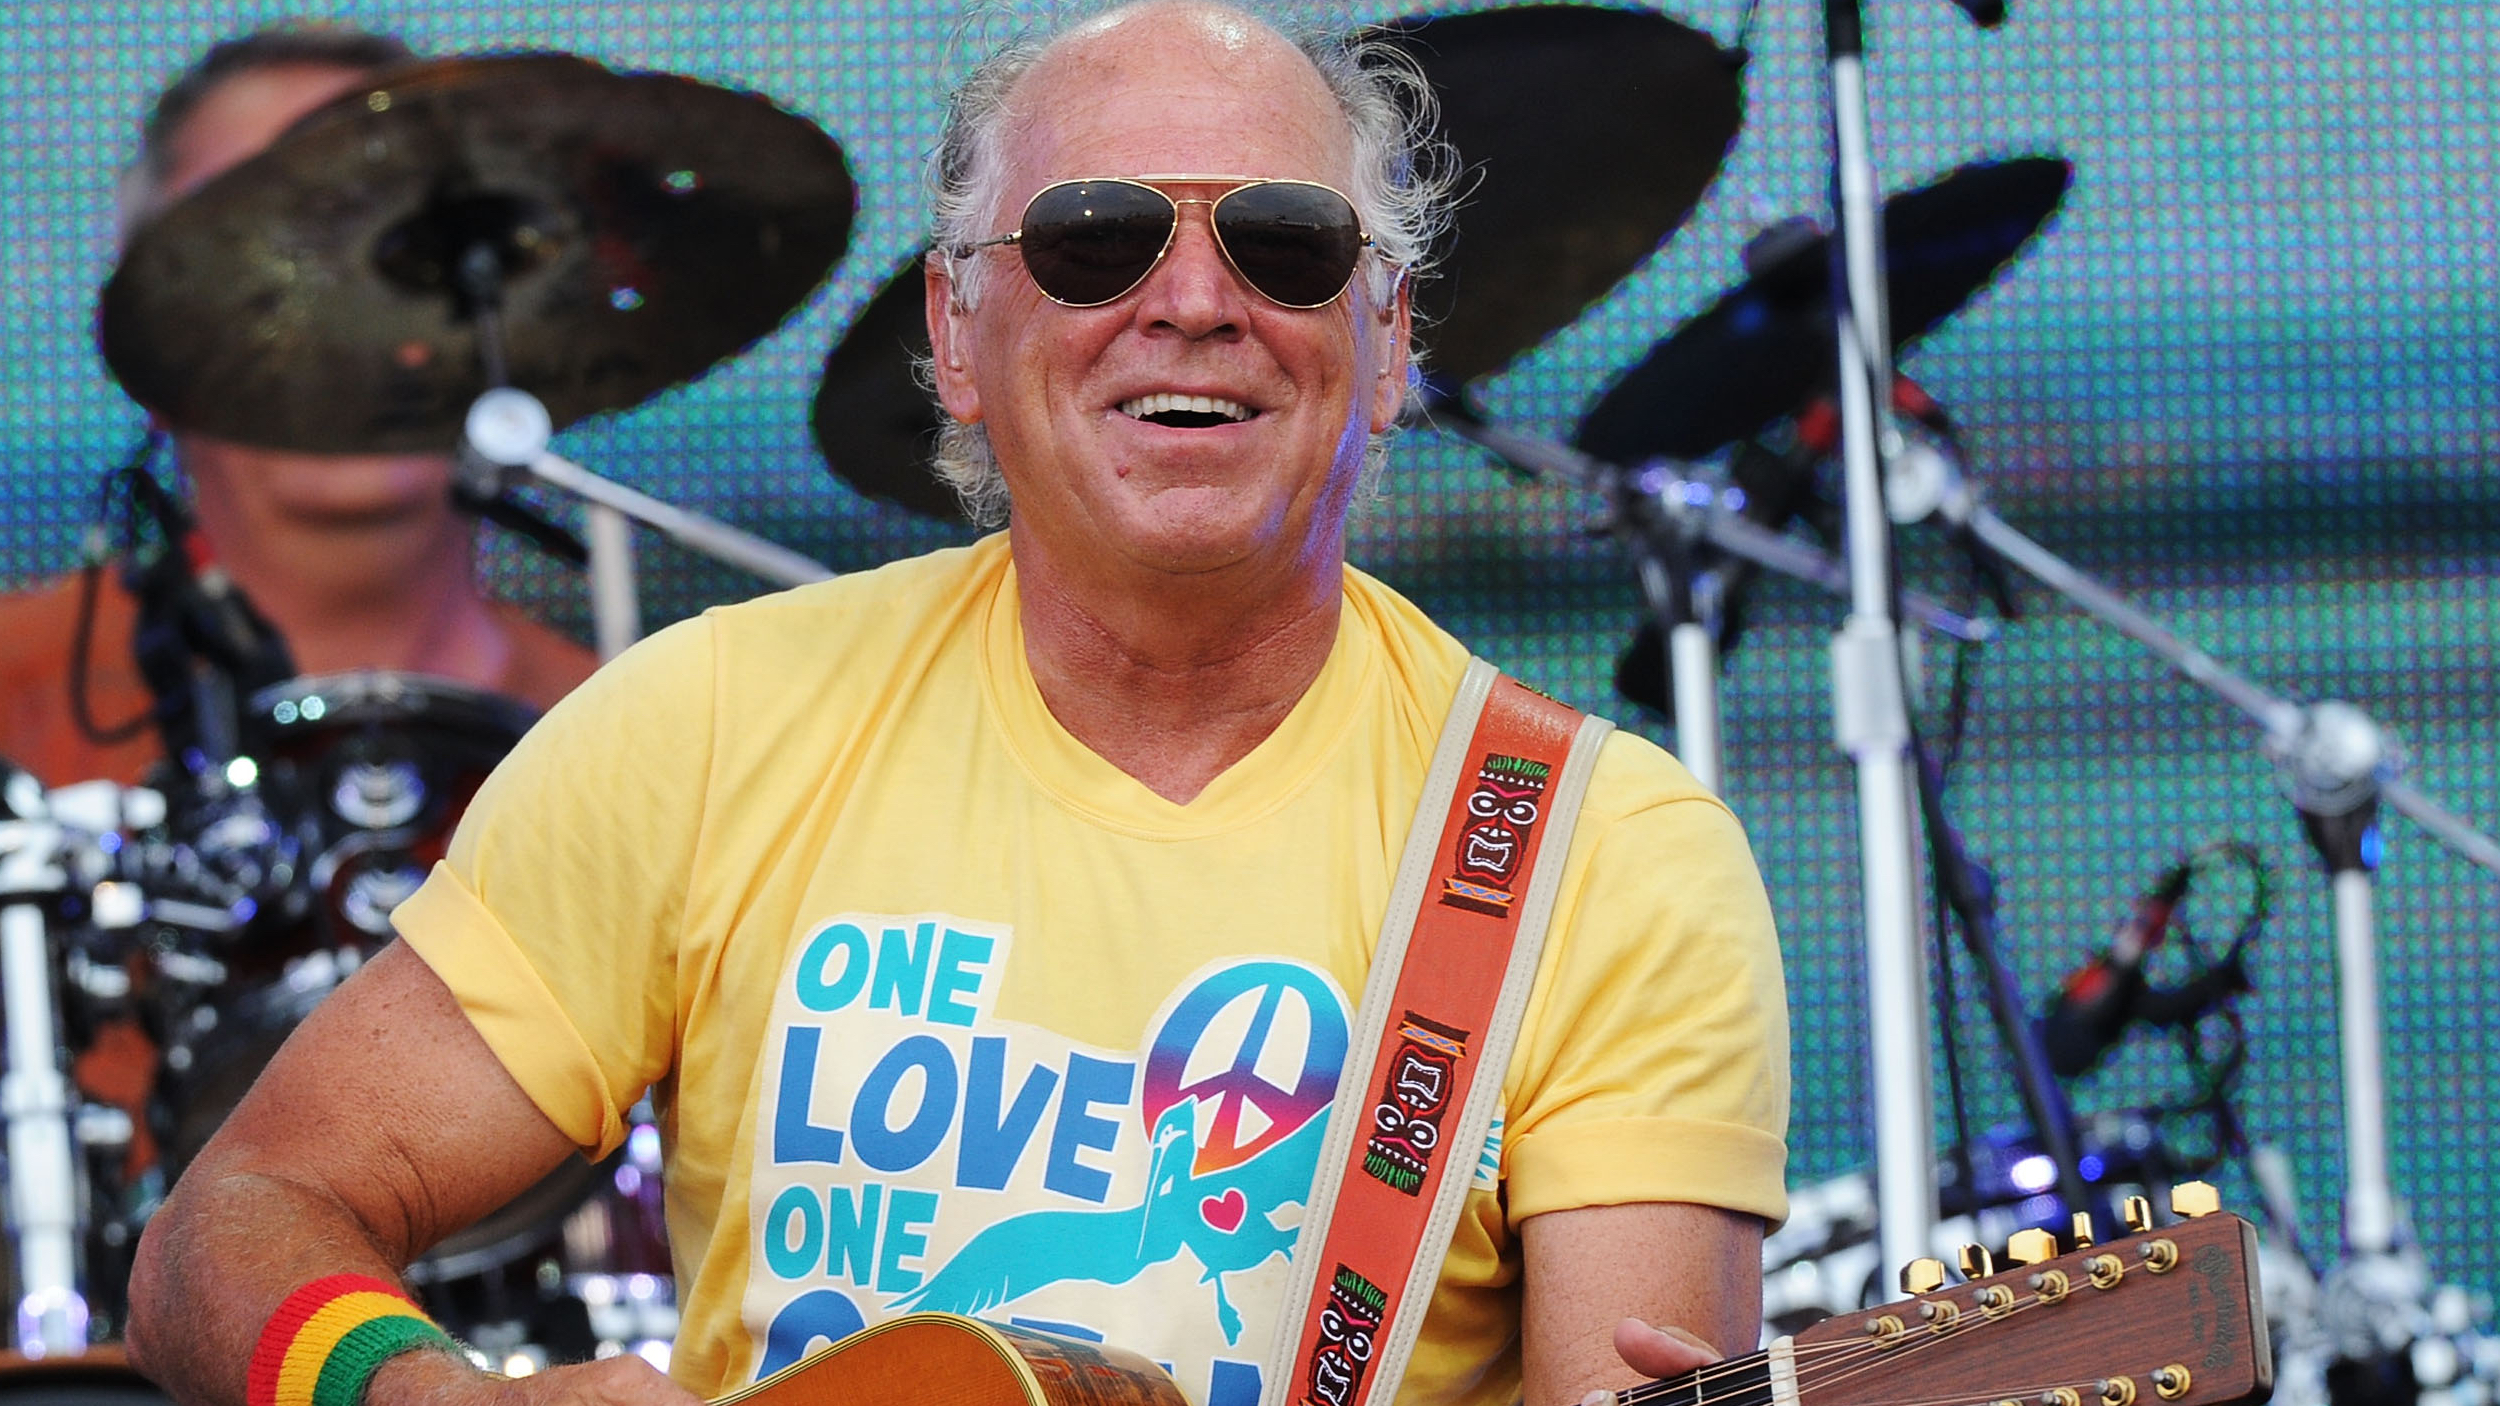 Jimmy Buffett hospitalized, concert postponed due to urgent medical issue.